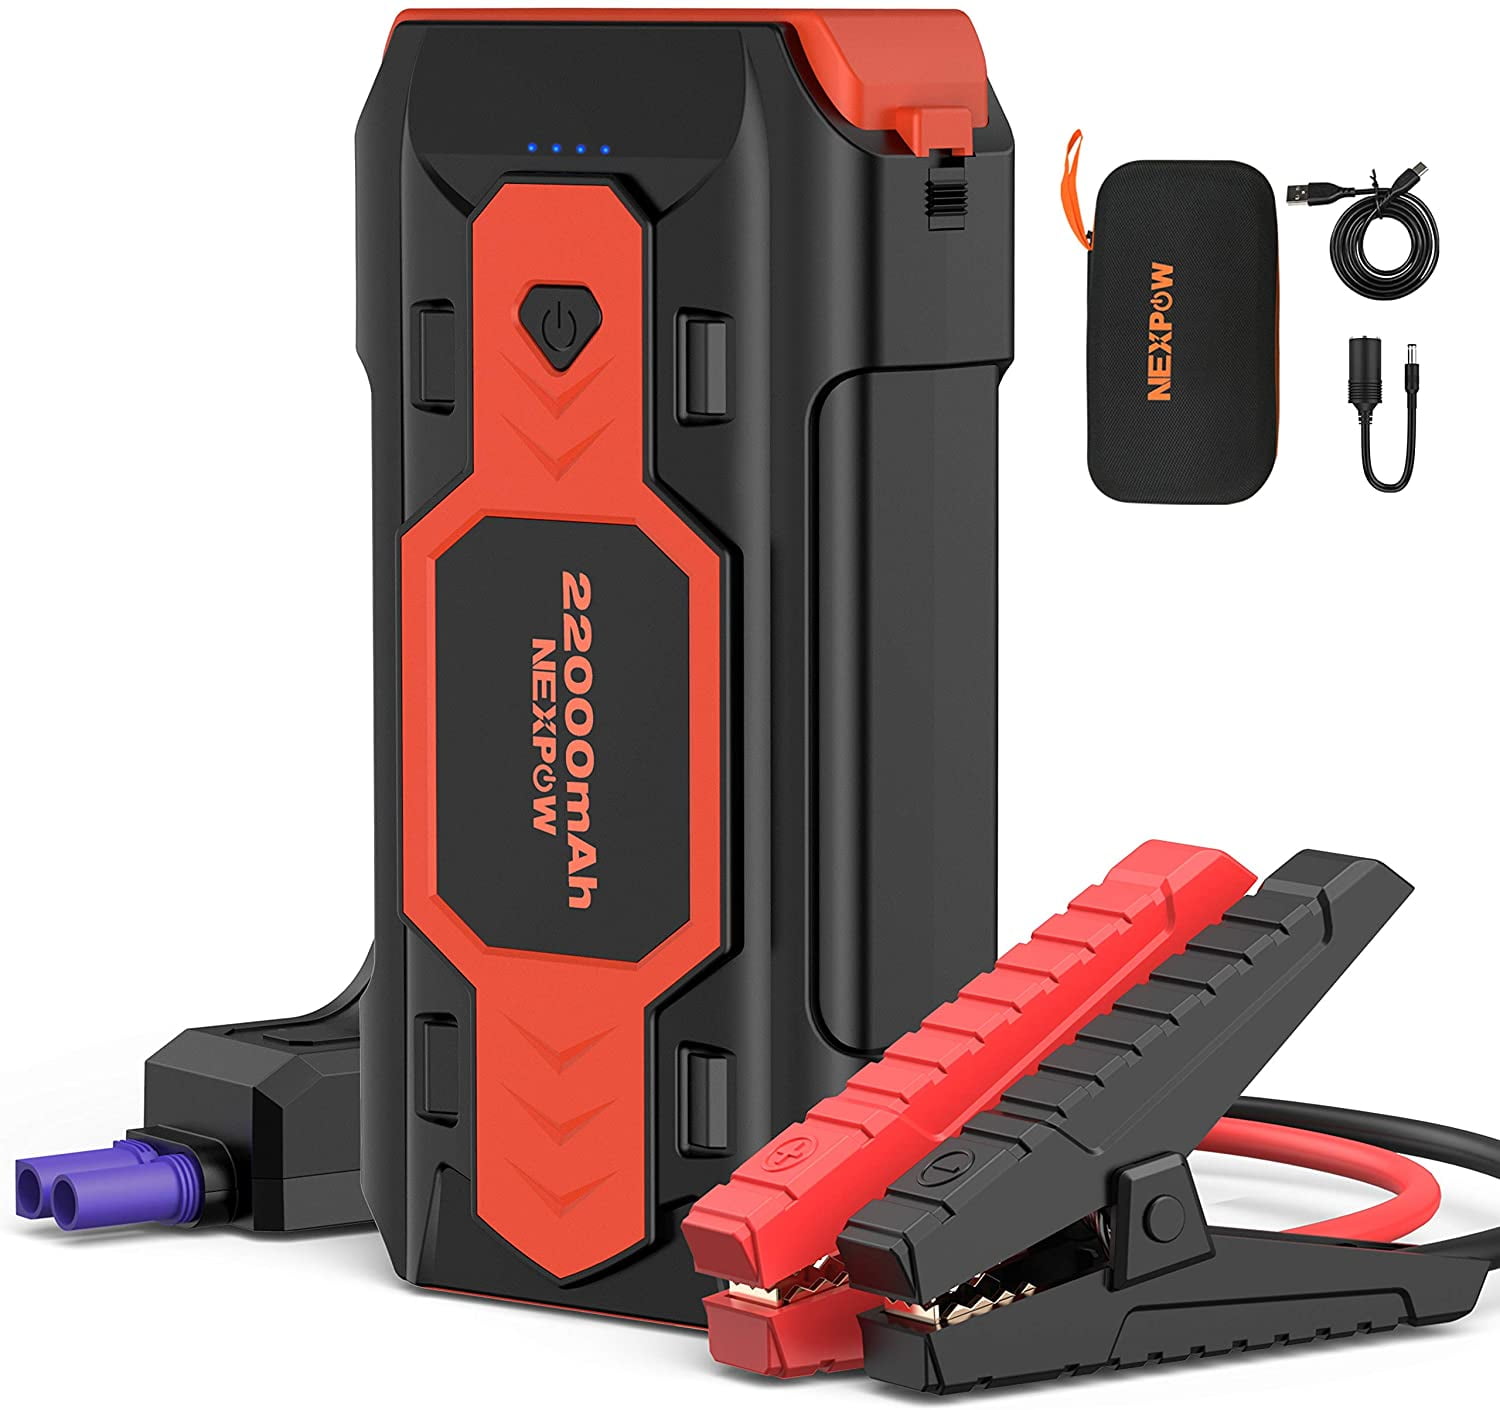 Up to 6.5L Gas or 4L Diesel Engine Type-C NEXPOW Car Battery Starter 1500A Peak 21800mAh 12V Portable Auto Car Battery Charger Jump Starter Battery Pack with USB Quick Charge 3.0